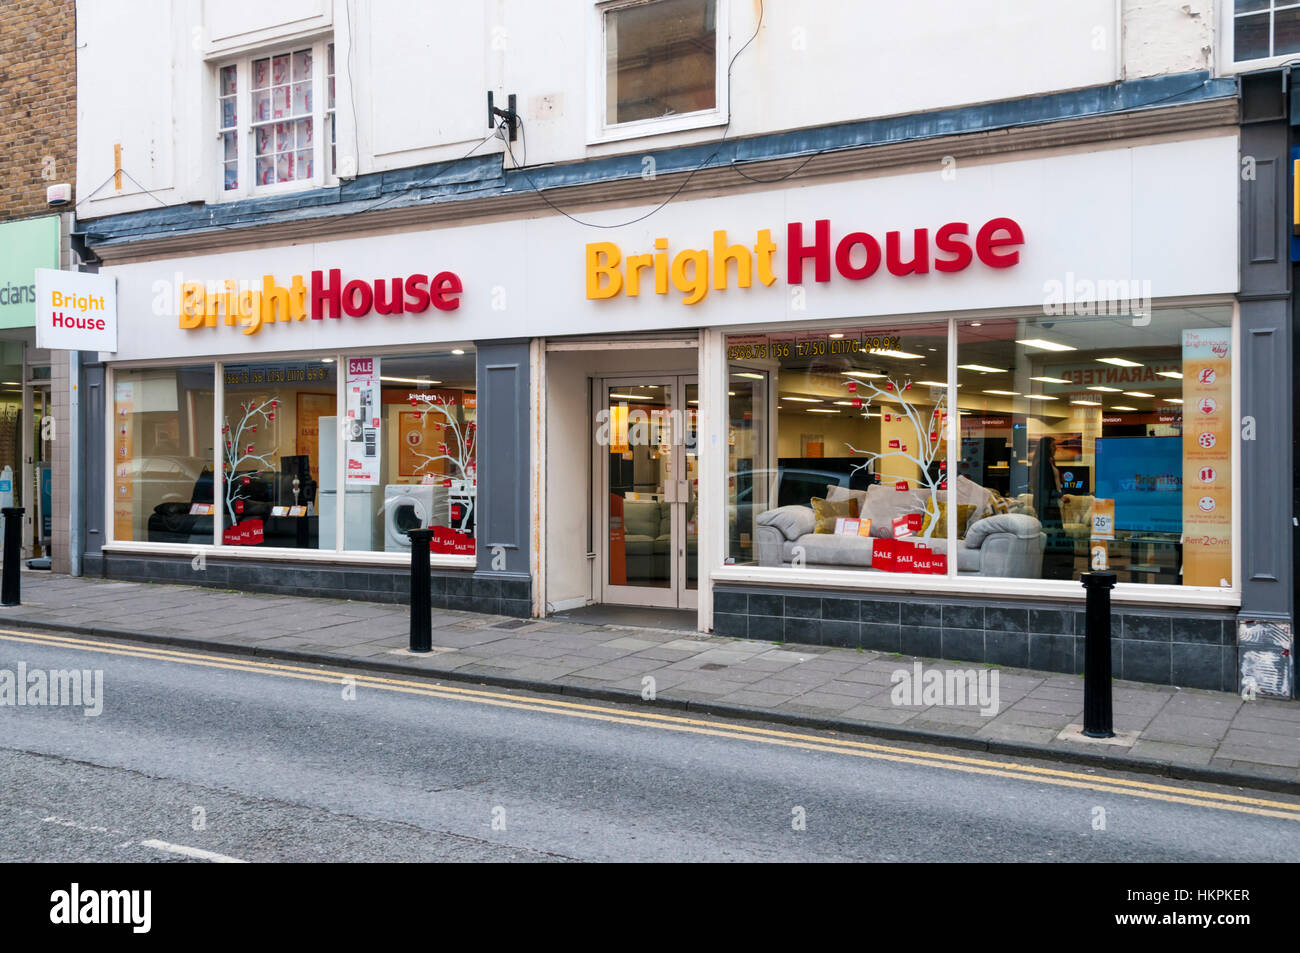 A branch of BrightHouse selling home electronic, domestic appliances and household furniture on a rent-to-own basis. Stock Photo